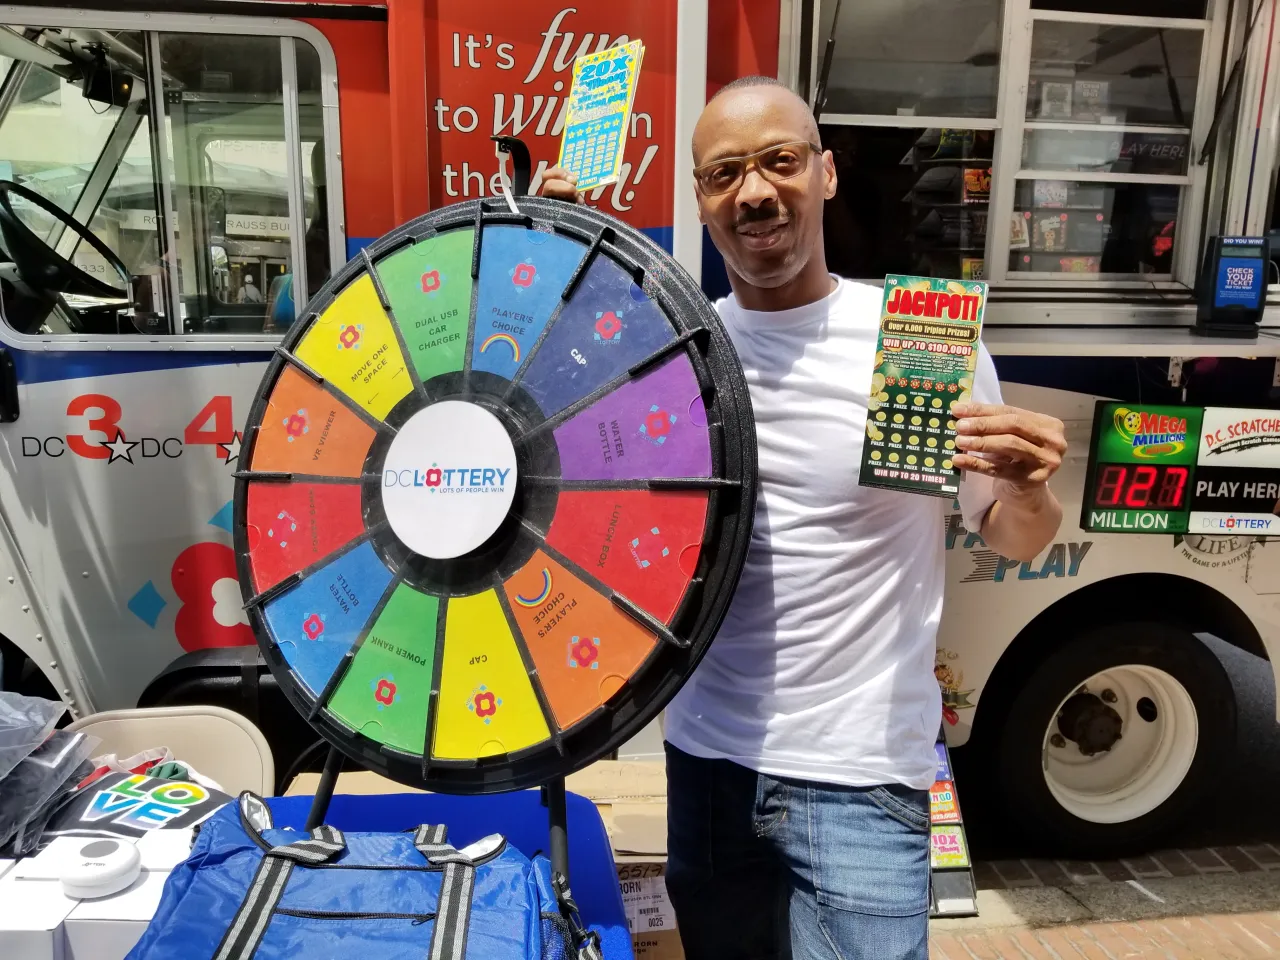 Man holding scratcher and posing with prize wheel